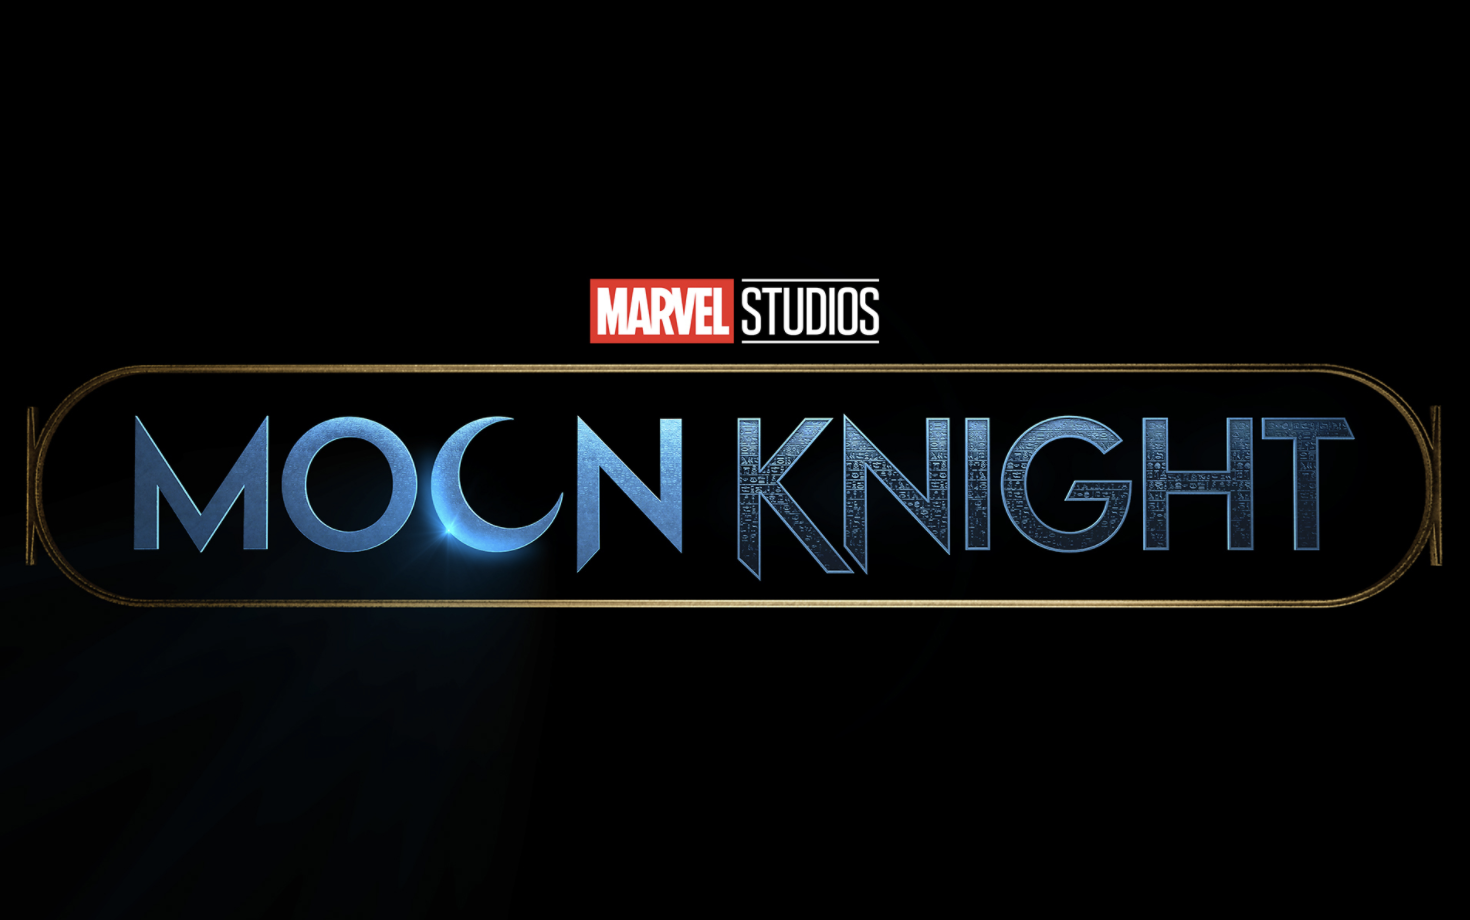 The logo for Moon Knight, one of the upcoming marvel shows